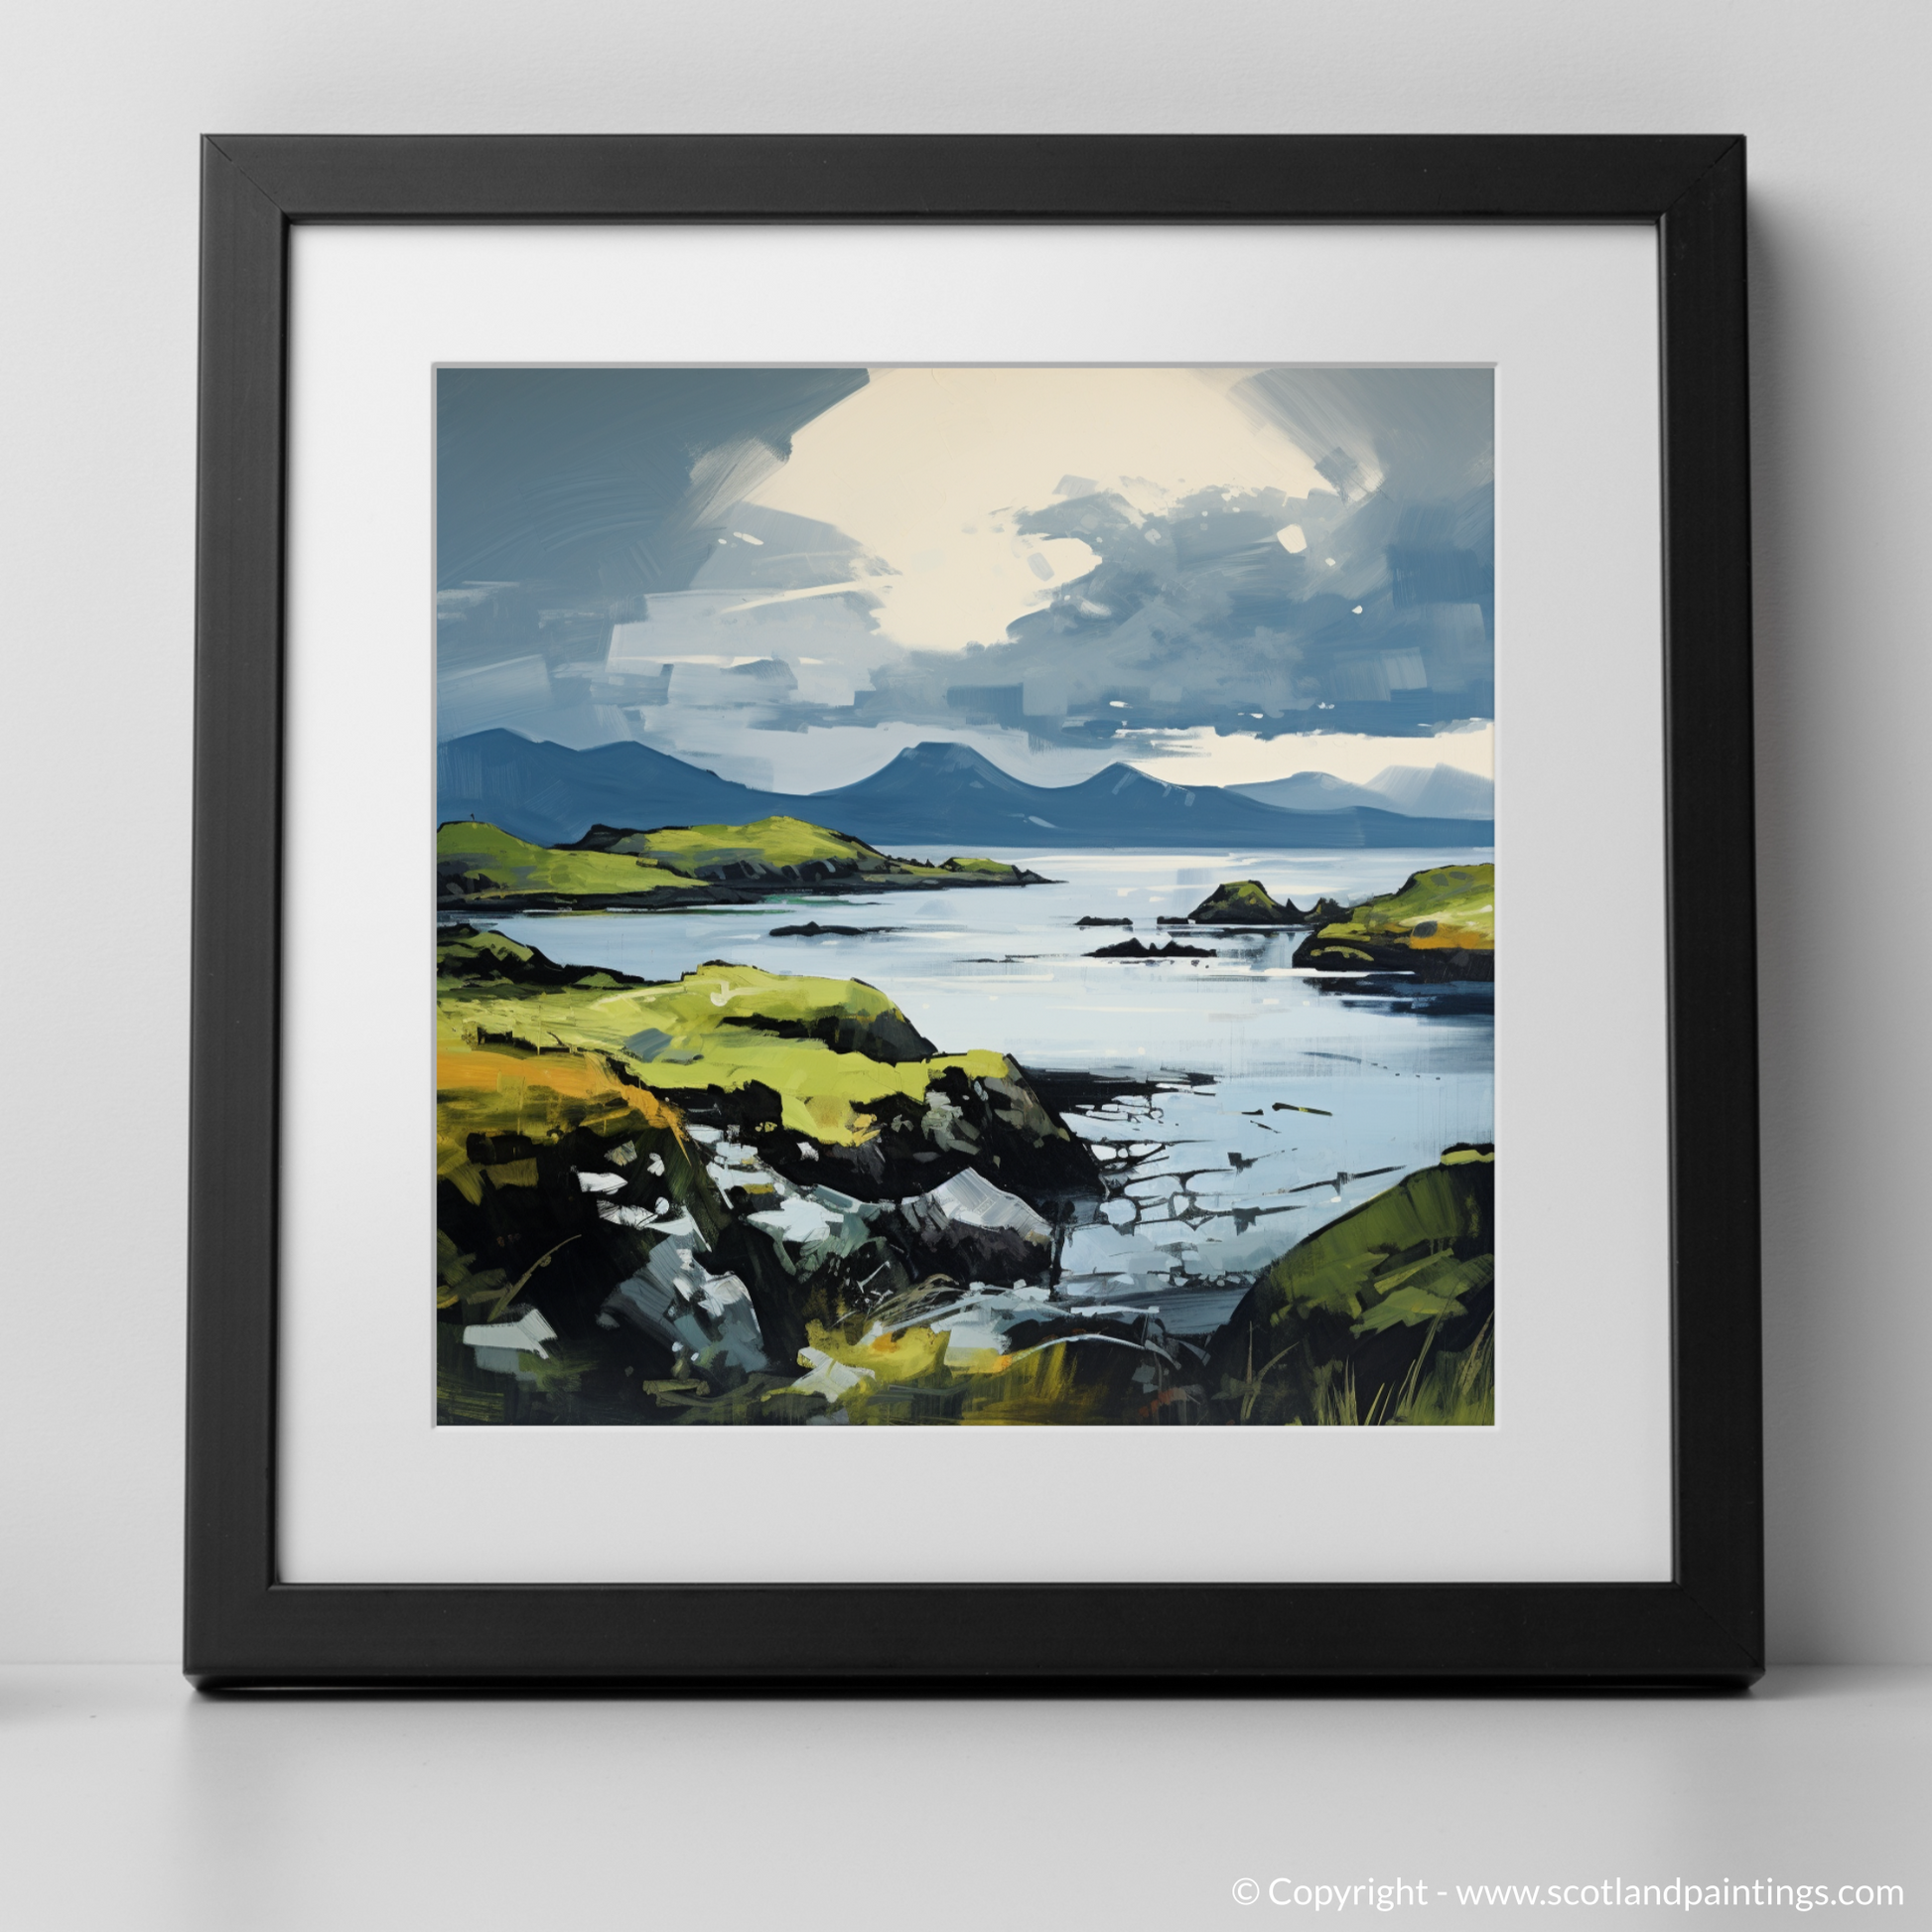 Art Print of Isle of Raasay, Inner Hebrides in summer with a black frame